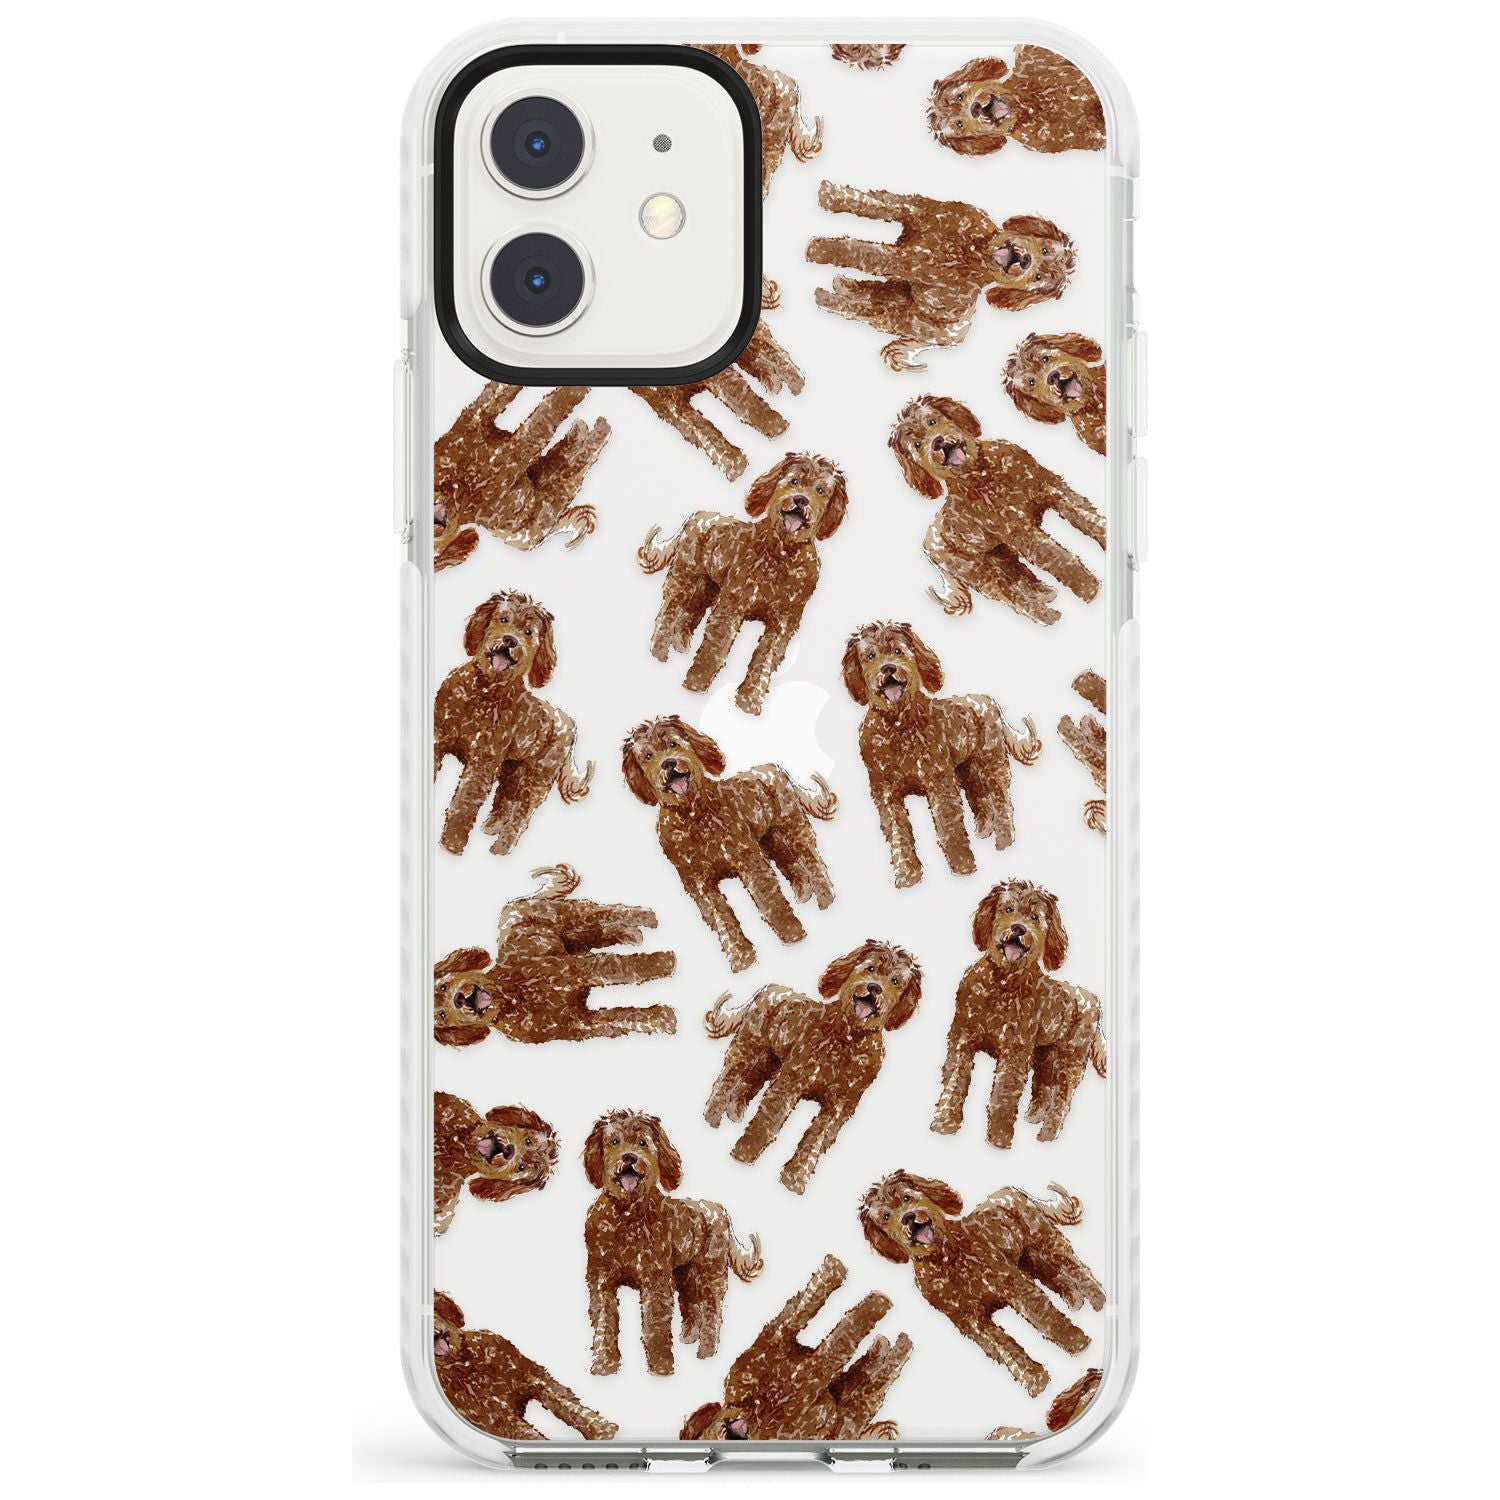 Labradoodle (Brown) Watercolour Dog Pattern Impact Phone Case for iPhone 11